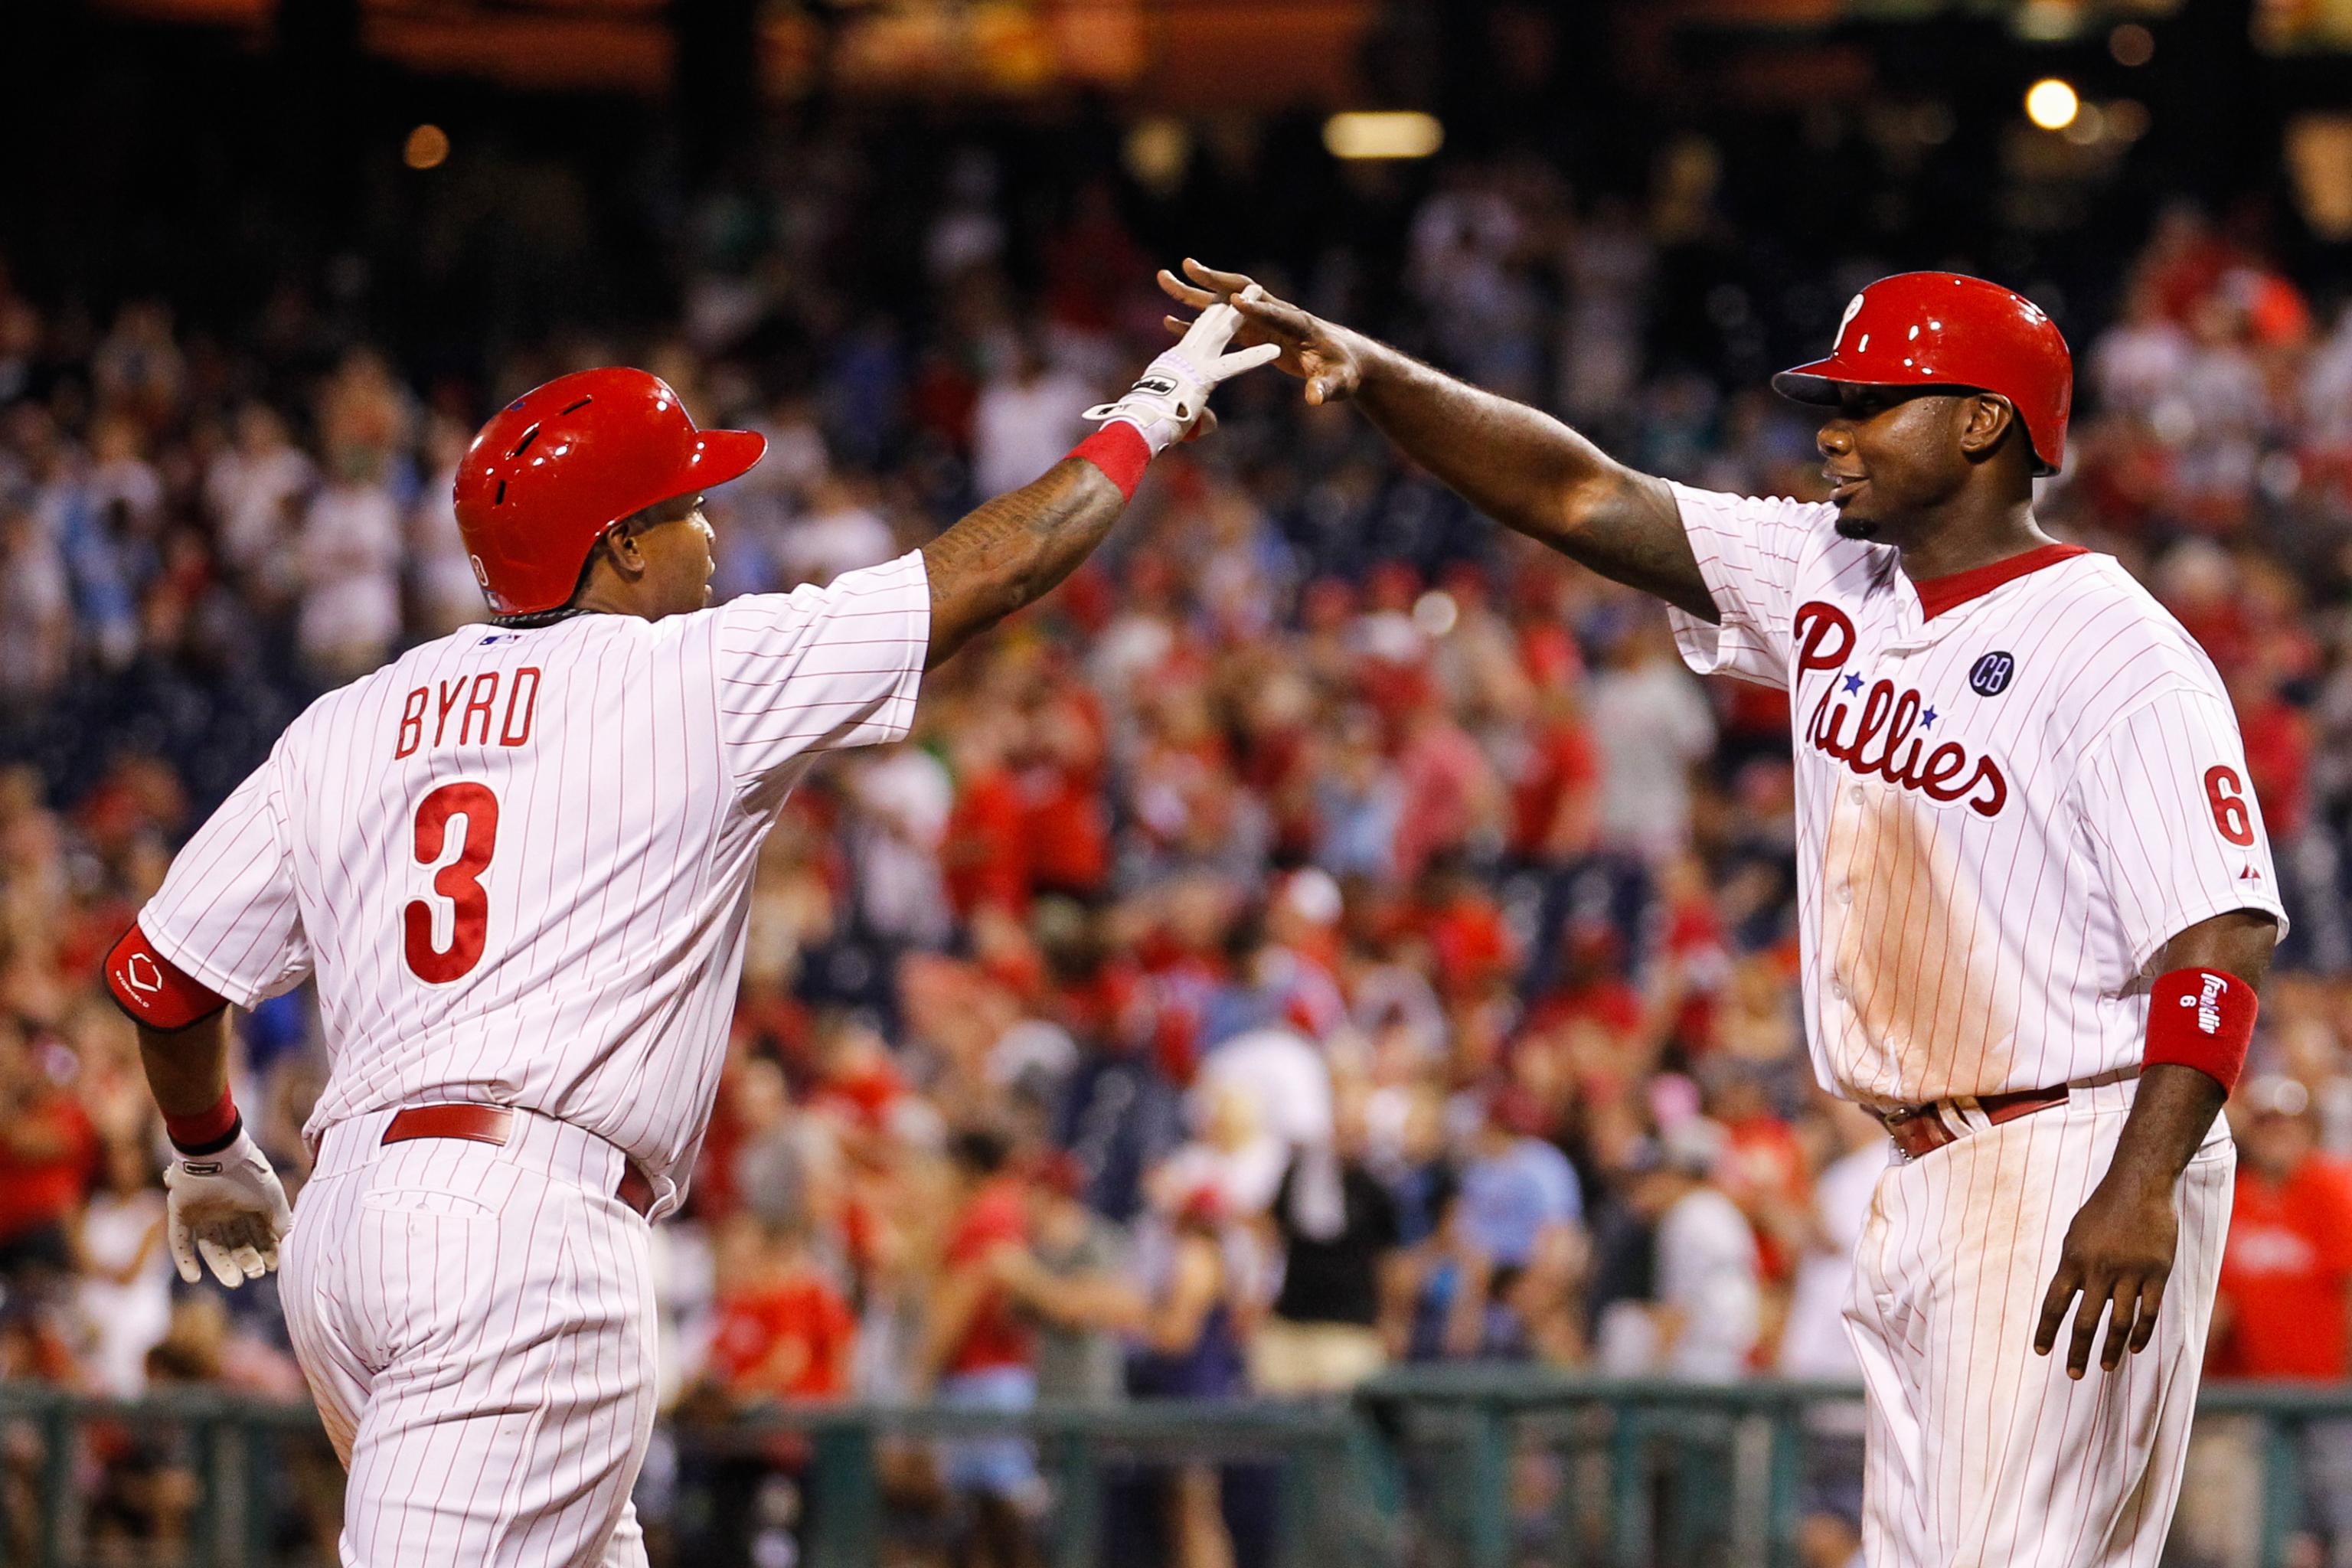 Phillies' Ryan Howard piling up strikeouts at record pace in World Series 